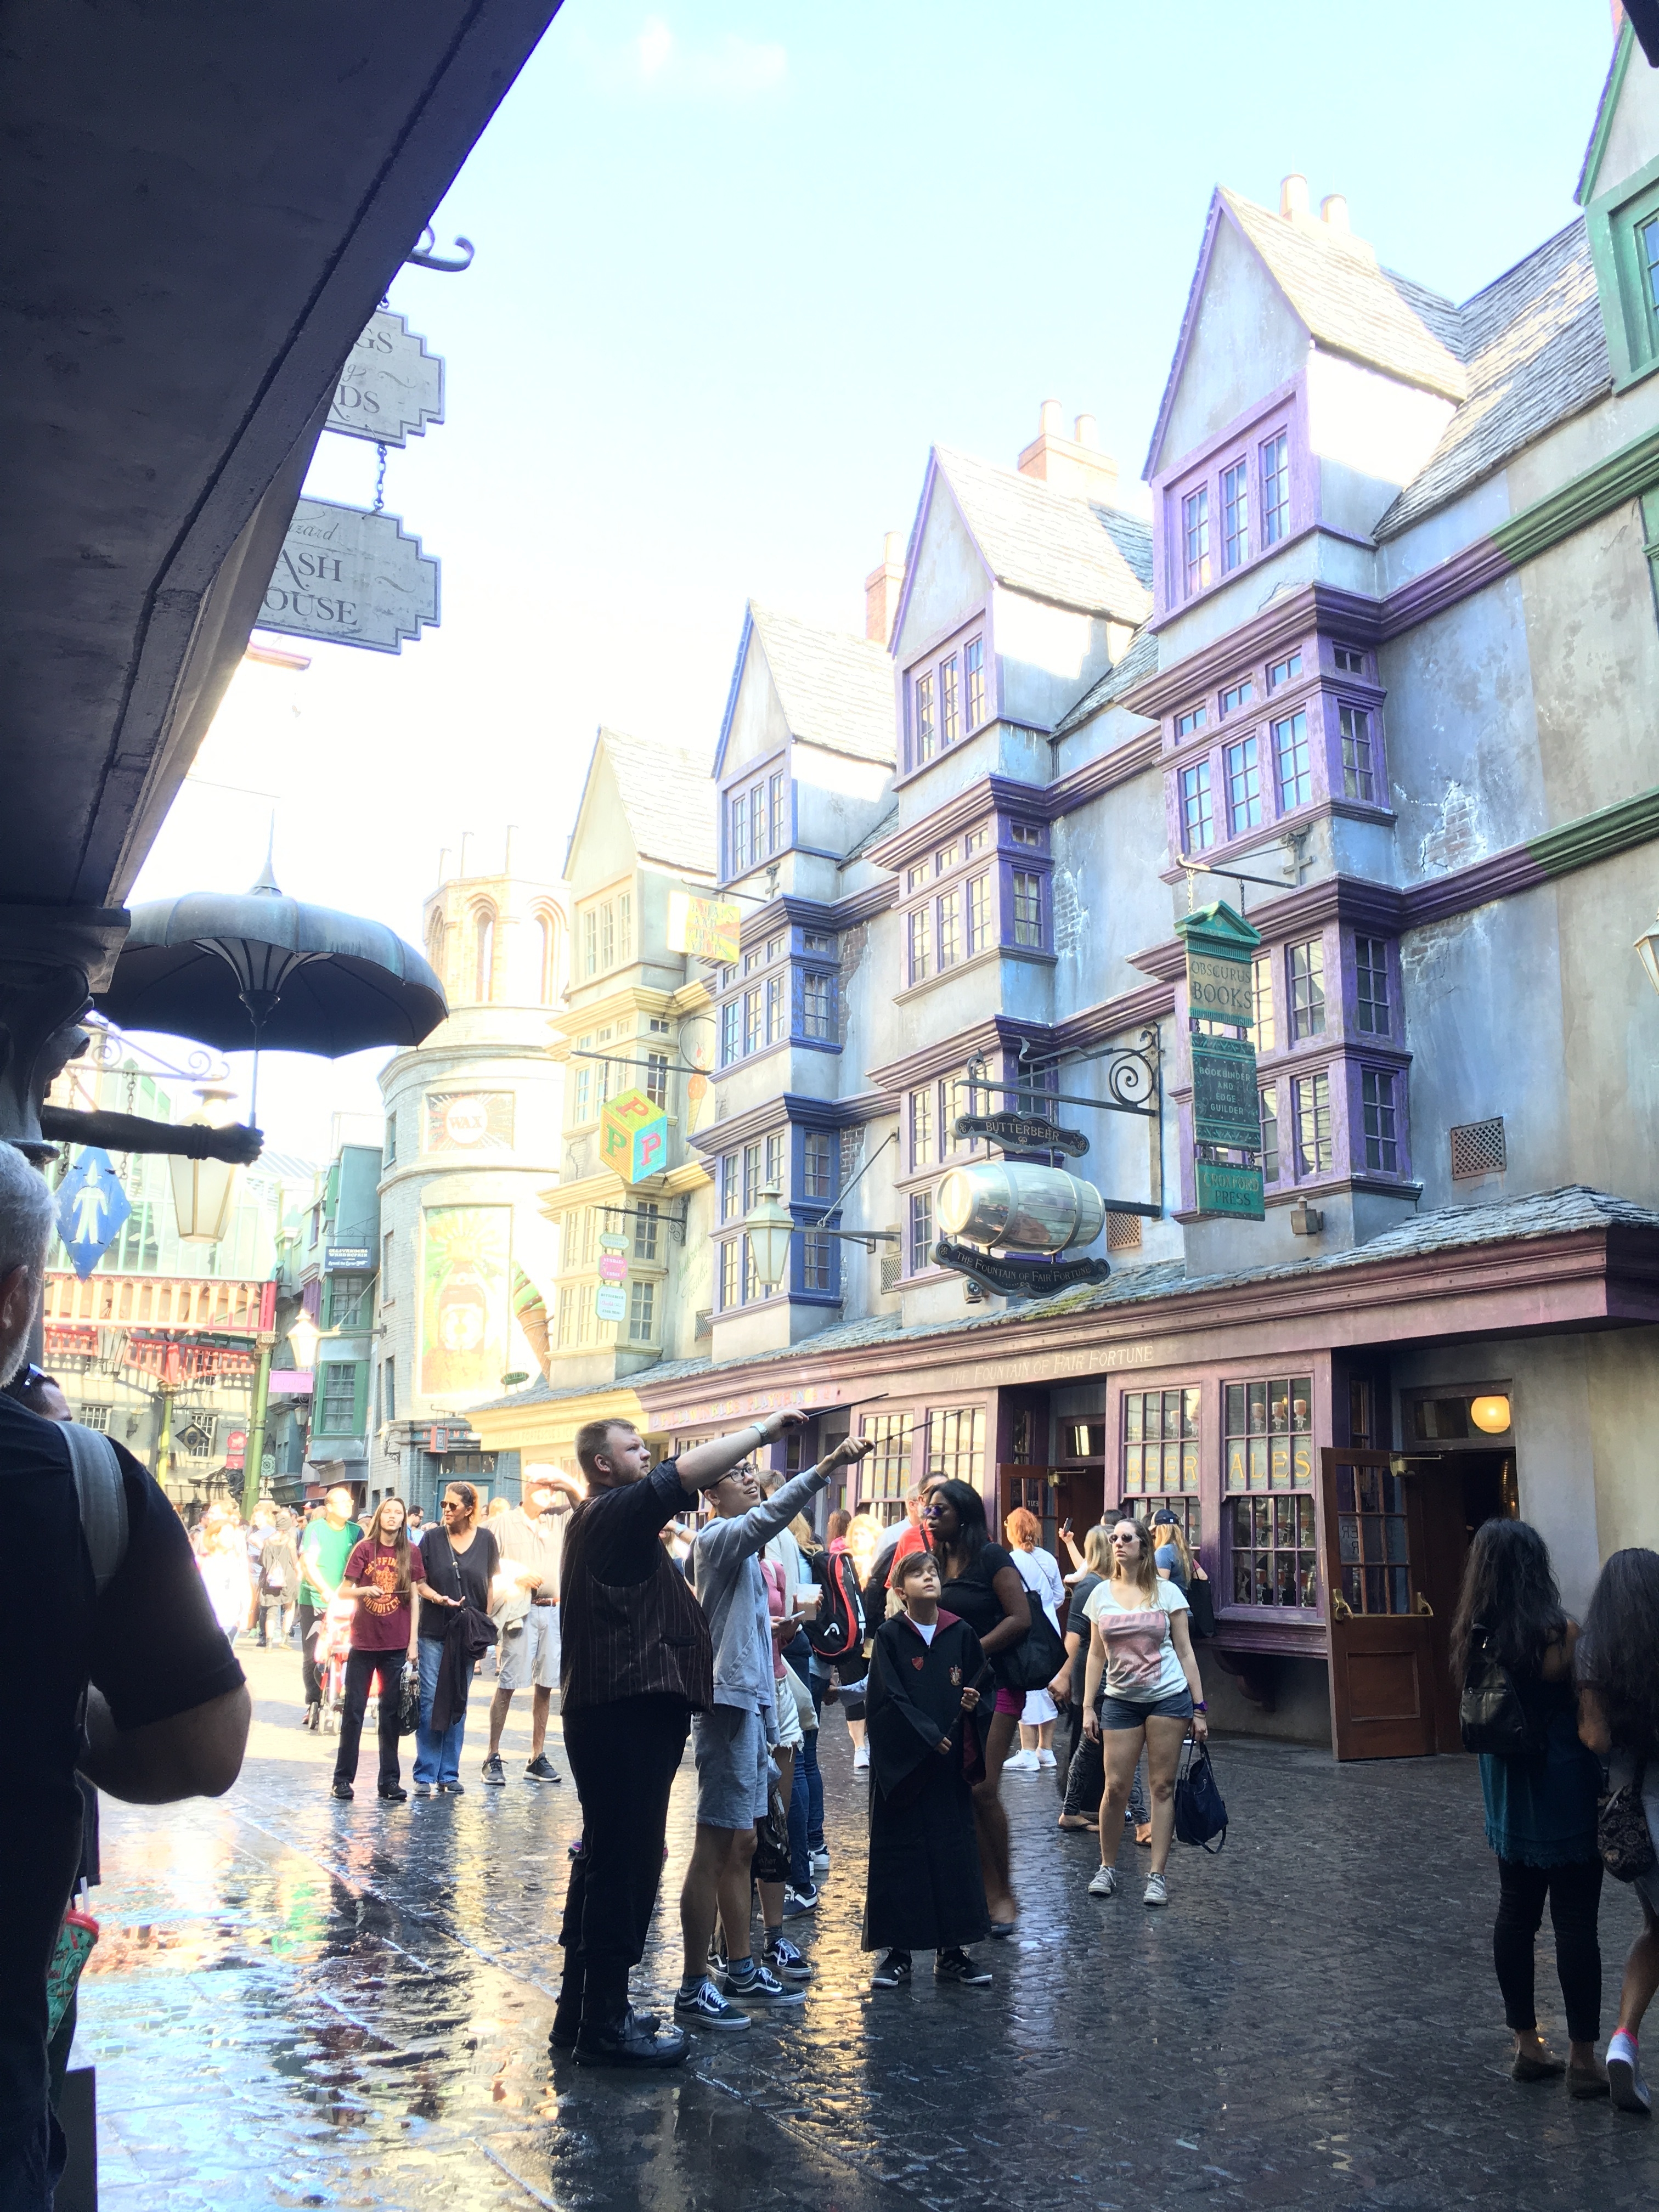 some people casting spells in Diagon Alley at Universal Studios